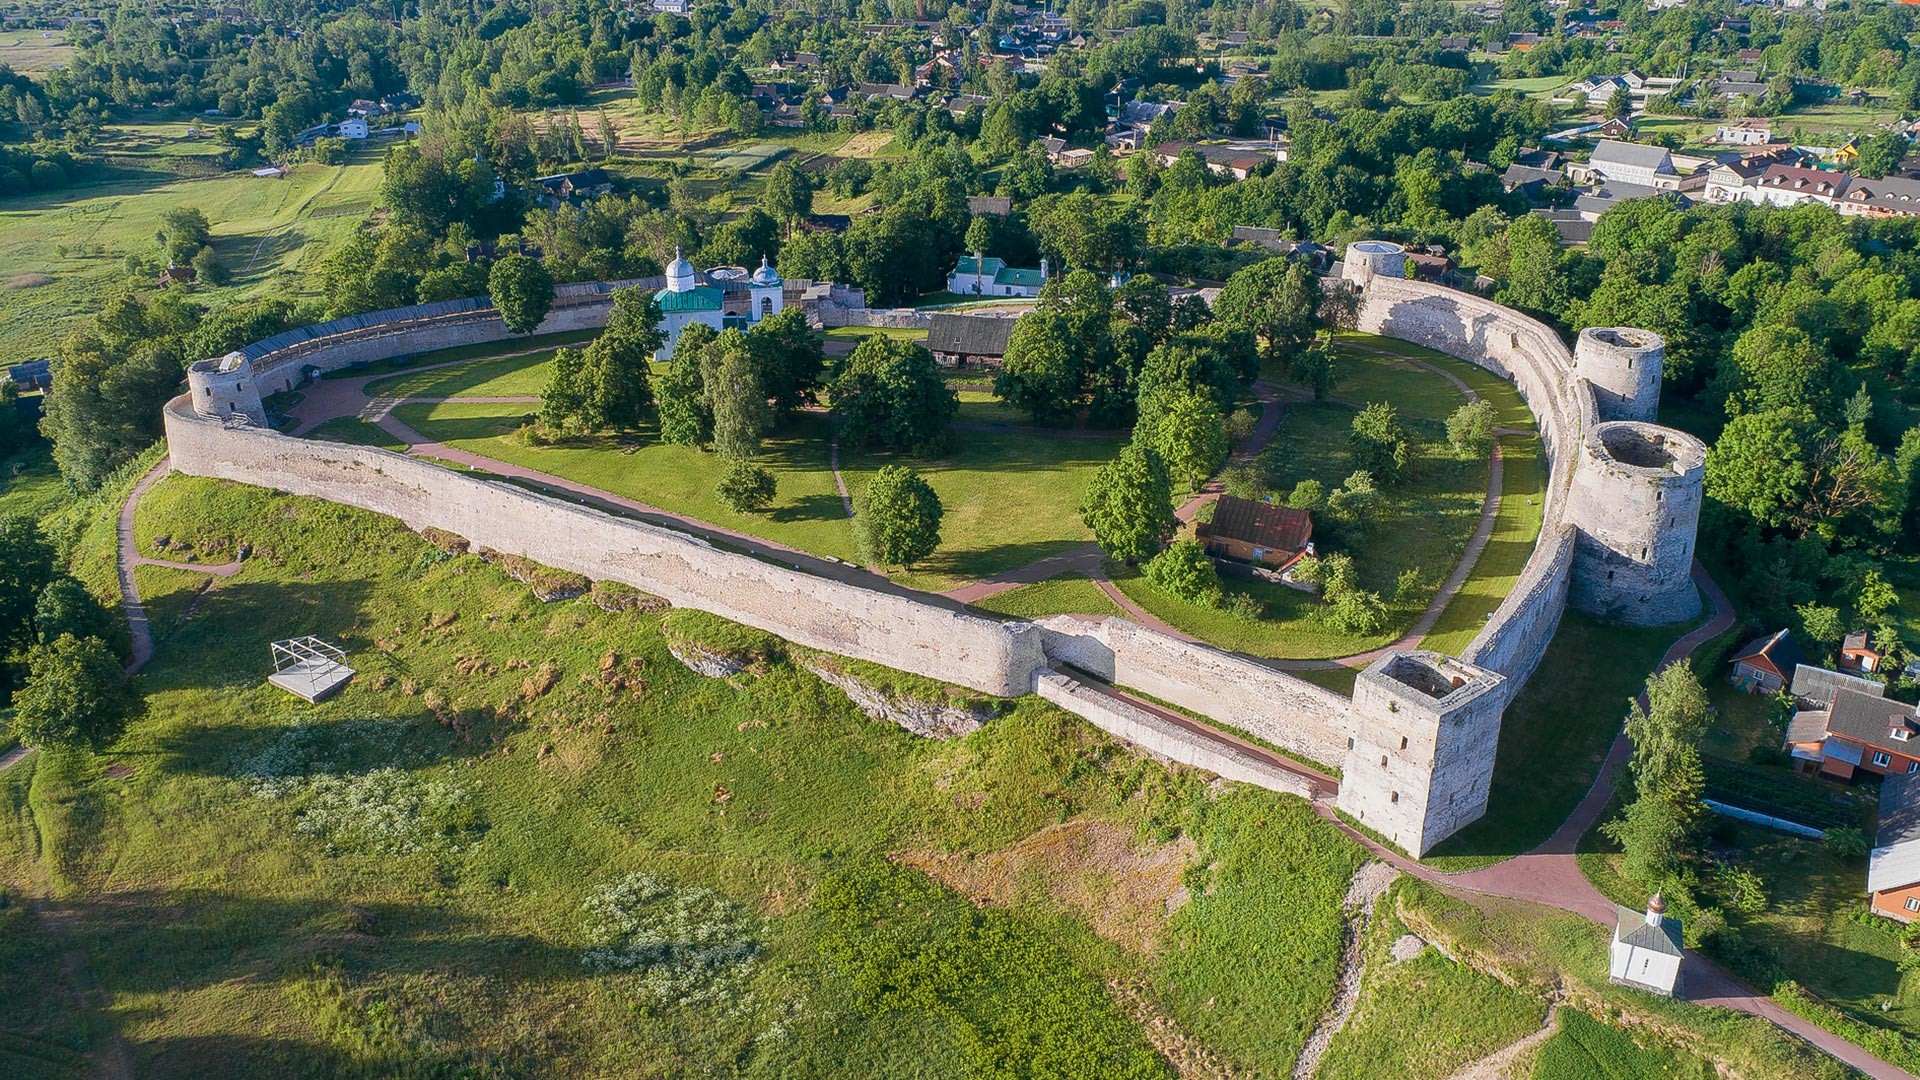 An aerial view on Izborsk's fortress